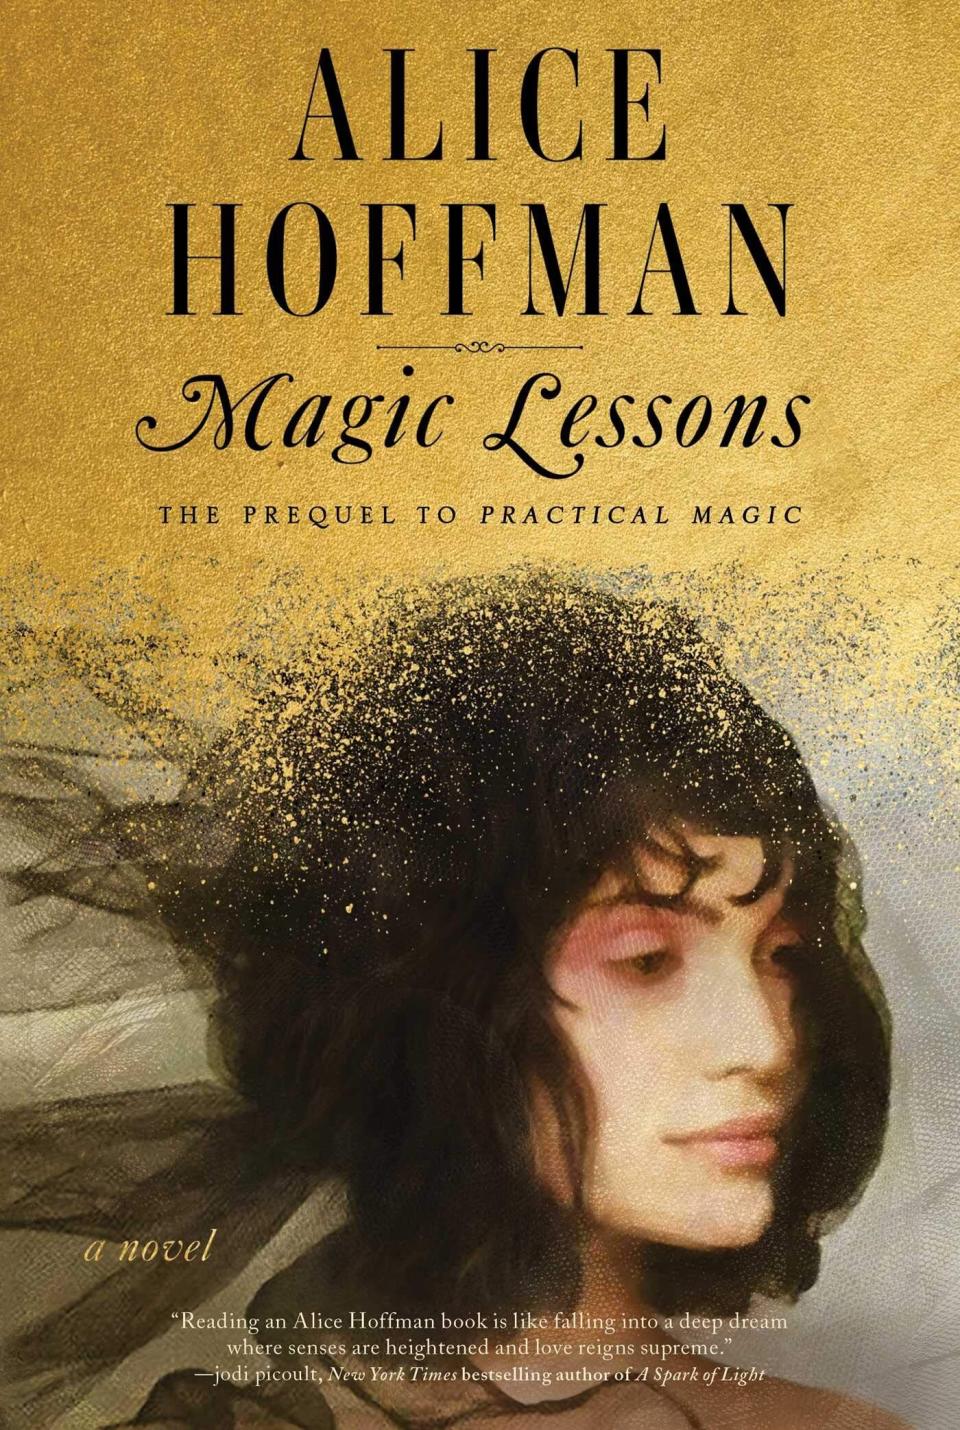 Alice Hoffman&rsquo;s latest tale serves as the prologue to her popular &ldquo;Practical Magic&rdquo; and &ldquo;The Rules of Magic.&rdquo; &ldquo;Magic Lessons&rdquo; takes readers to the 1600s, where the Owens family bloodline begins. After learning the &ldquo;unnamed arts&rdquo; from her adopted mother, Maria Owens ends up in Salem, Massachusetts to pursue a man who has spurned her. It&rsquo;s here that she learns a lesson in magic and invokes a curse that will haunt her family for years. Read more about it on <a href="https://www.goodreads.com/book/show/50892349-magic-lessons" target="_blank" rel="noopener noreferrer">Goodreads﻿</a> and grab a copy on <a href="https://amzn.to/3lehLd7" target="_blank" rel="noopener noreferrer">Amazon</a> or <a href="https://fave.co/30ux2hU" target="_blank" rel="noopener noreferrer">Bookshop</a>. <br /><br /><i>Expected release date: October 6</i>